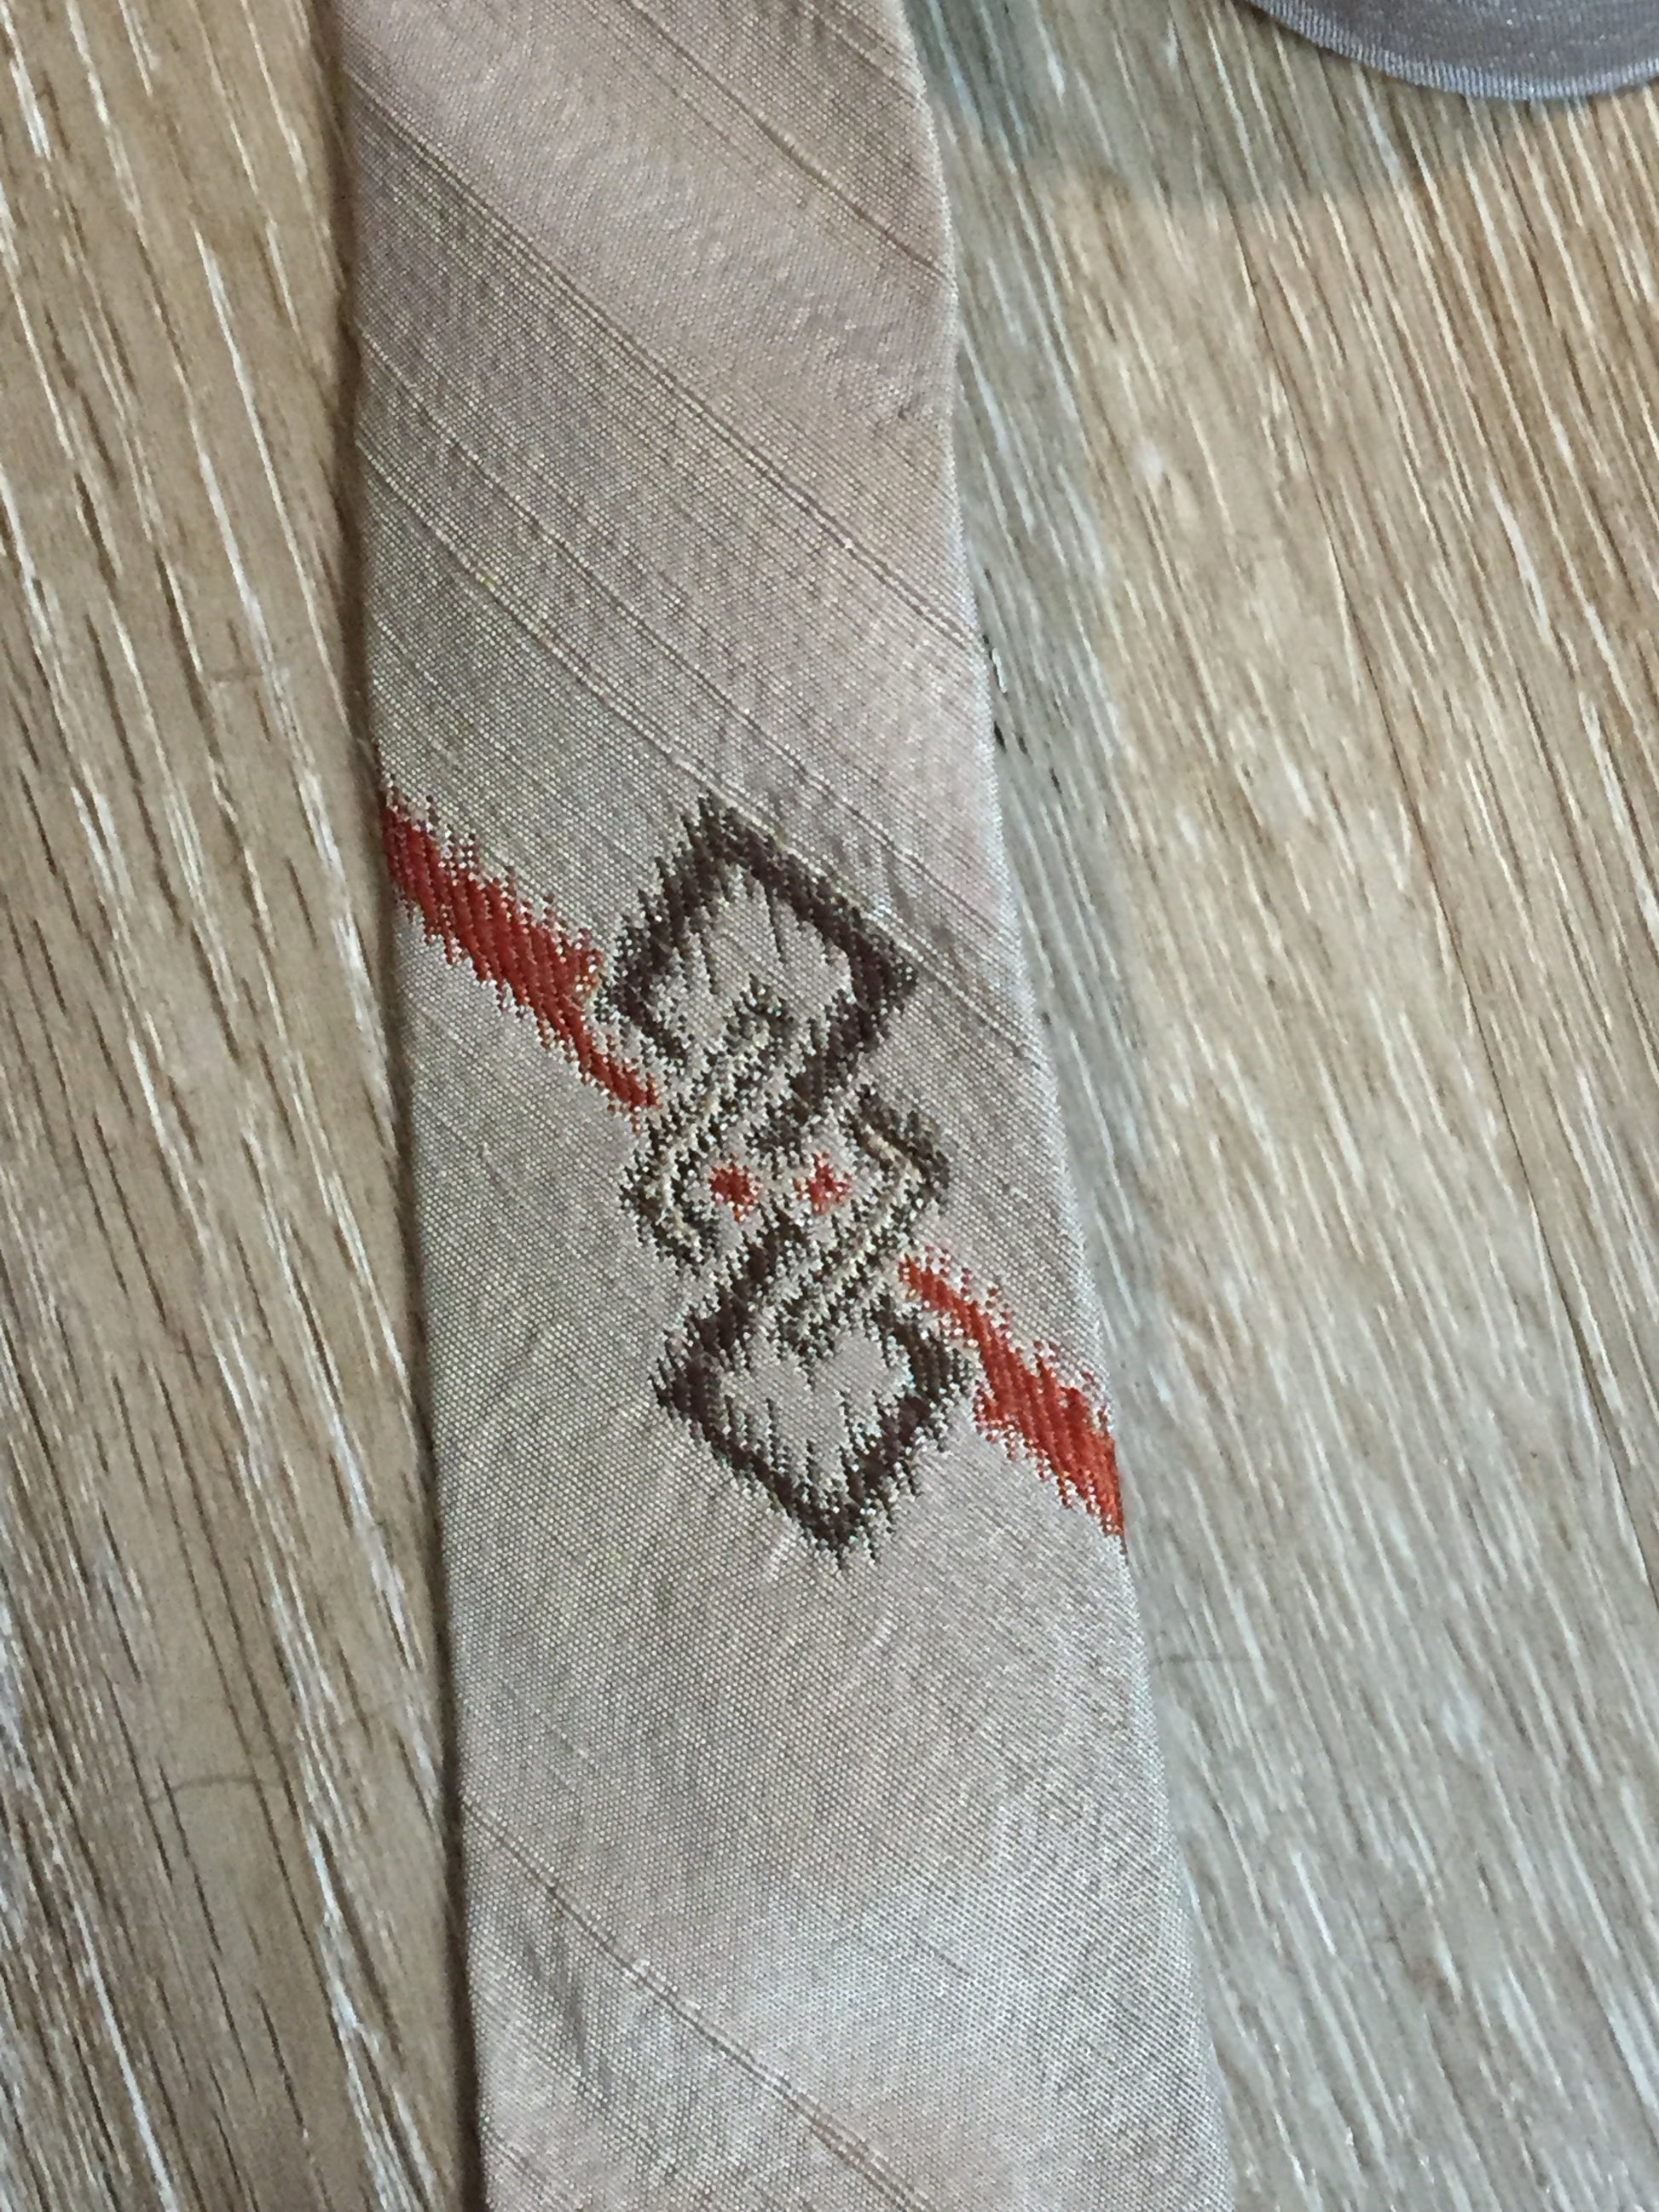 Kingspier Vintage - Metallic beige, orange and brown Tie. Fibres unknown.

Length: 53.25” 
Width: 2.25” 

This tie is in excellent condition.